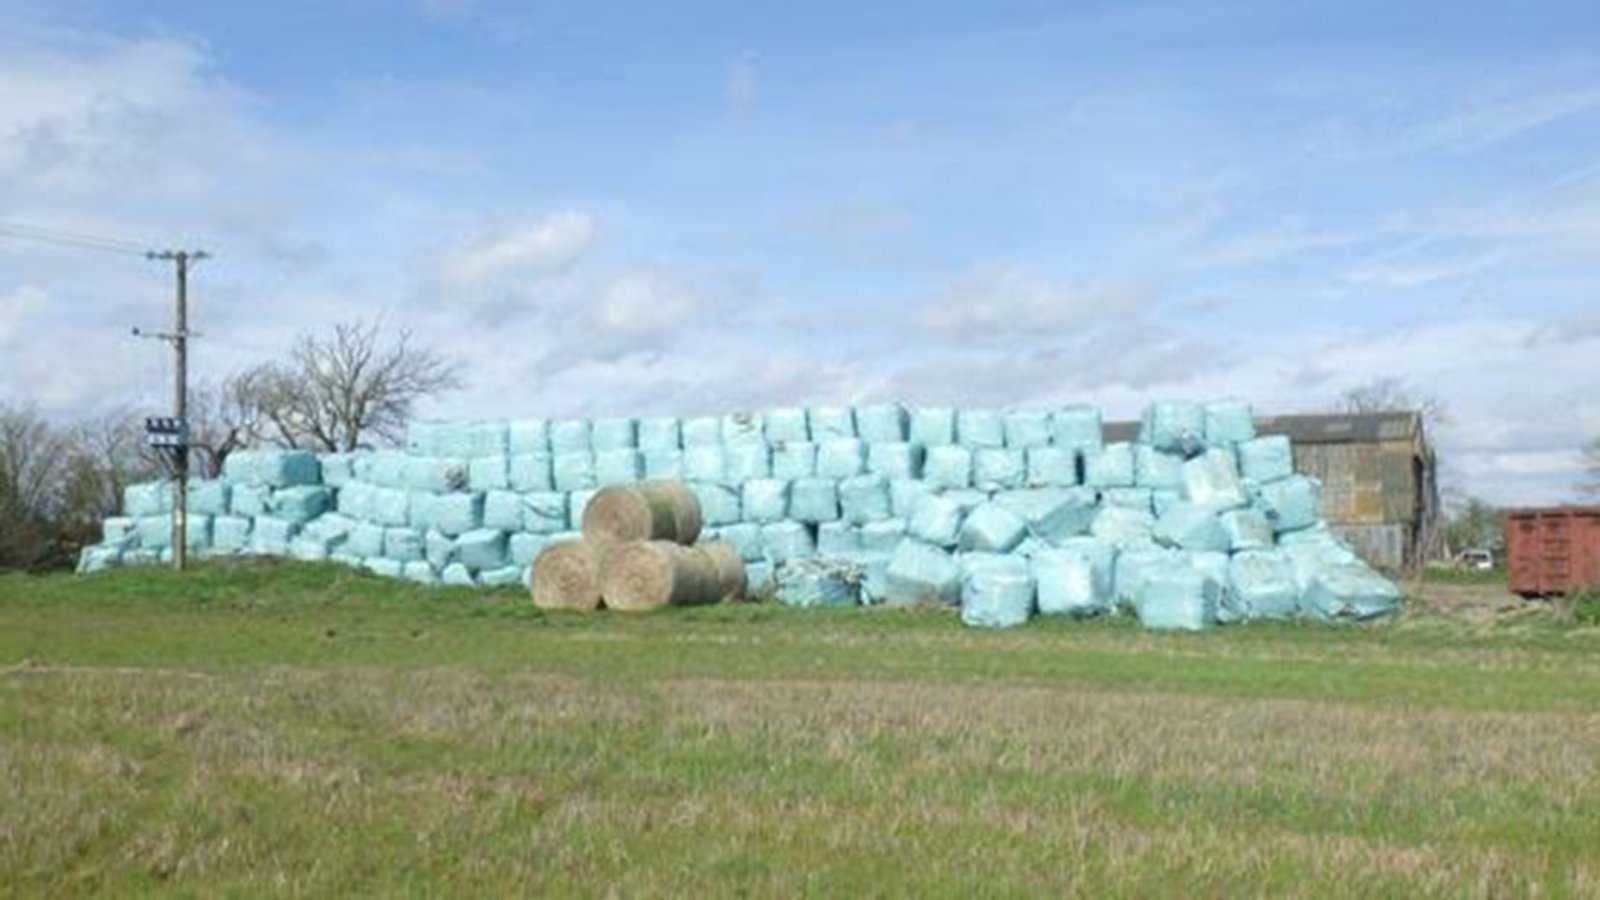 The waste scam has left the Lincolnshire farmers with large clean-up costs